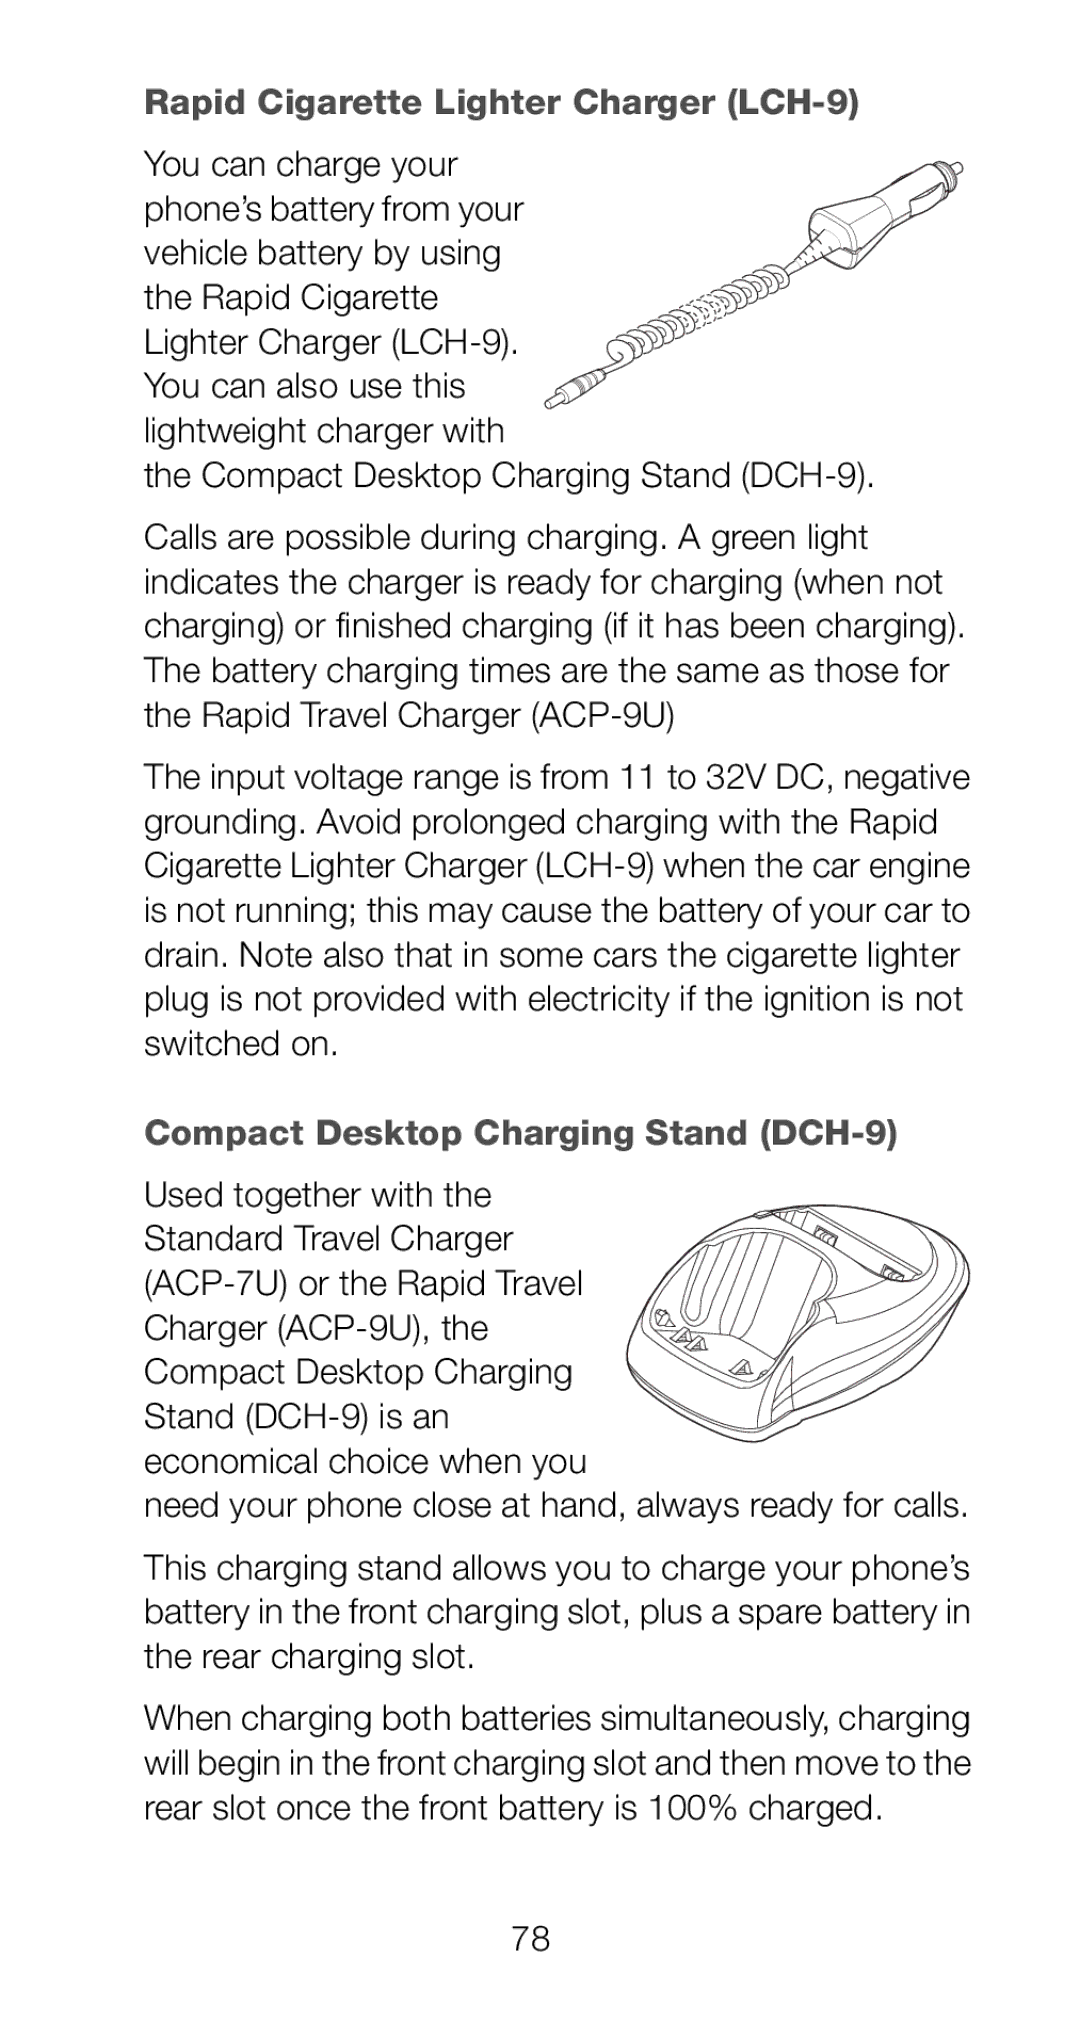 Nokia 6161i owner manual Rapid Cigarette Lighter Charger LCH-9, You can charge your, Compact Desktop Charging Stand DCH-9 